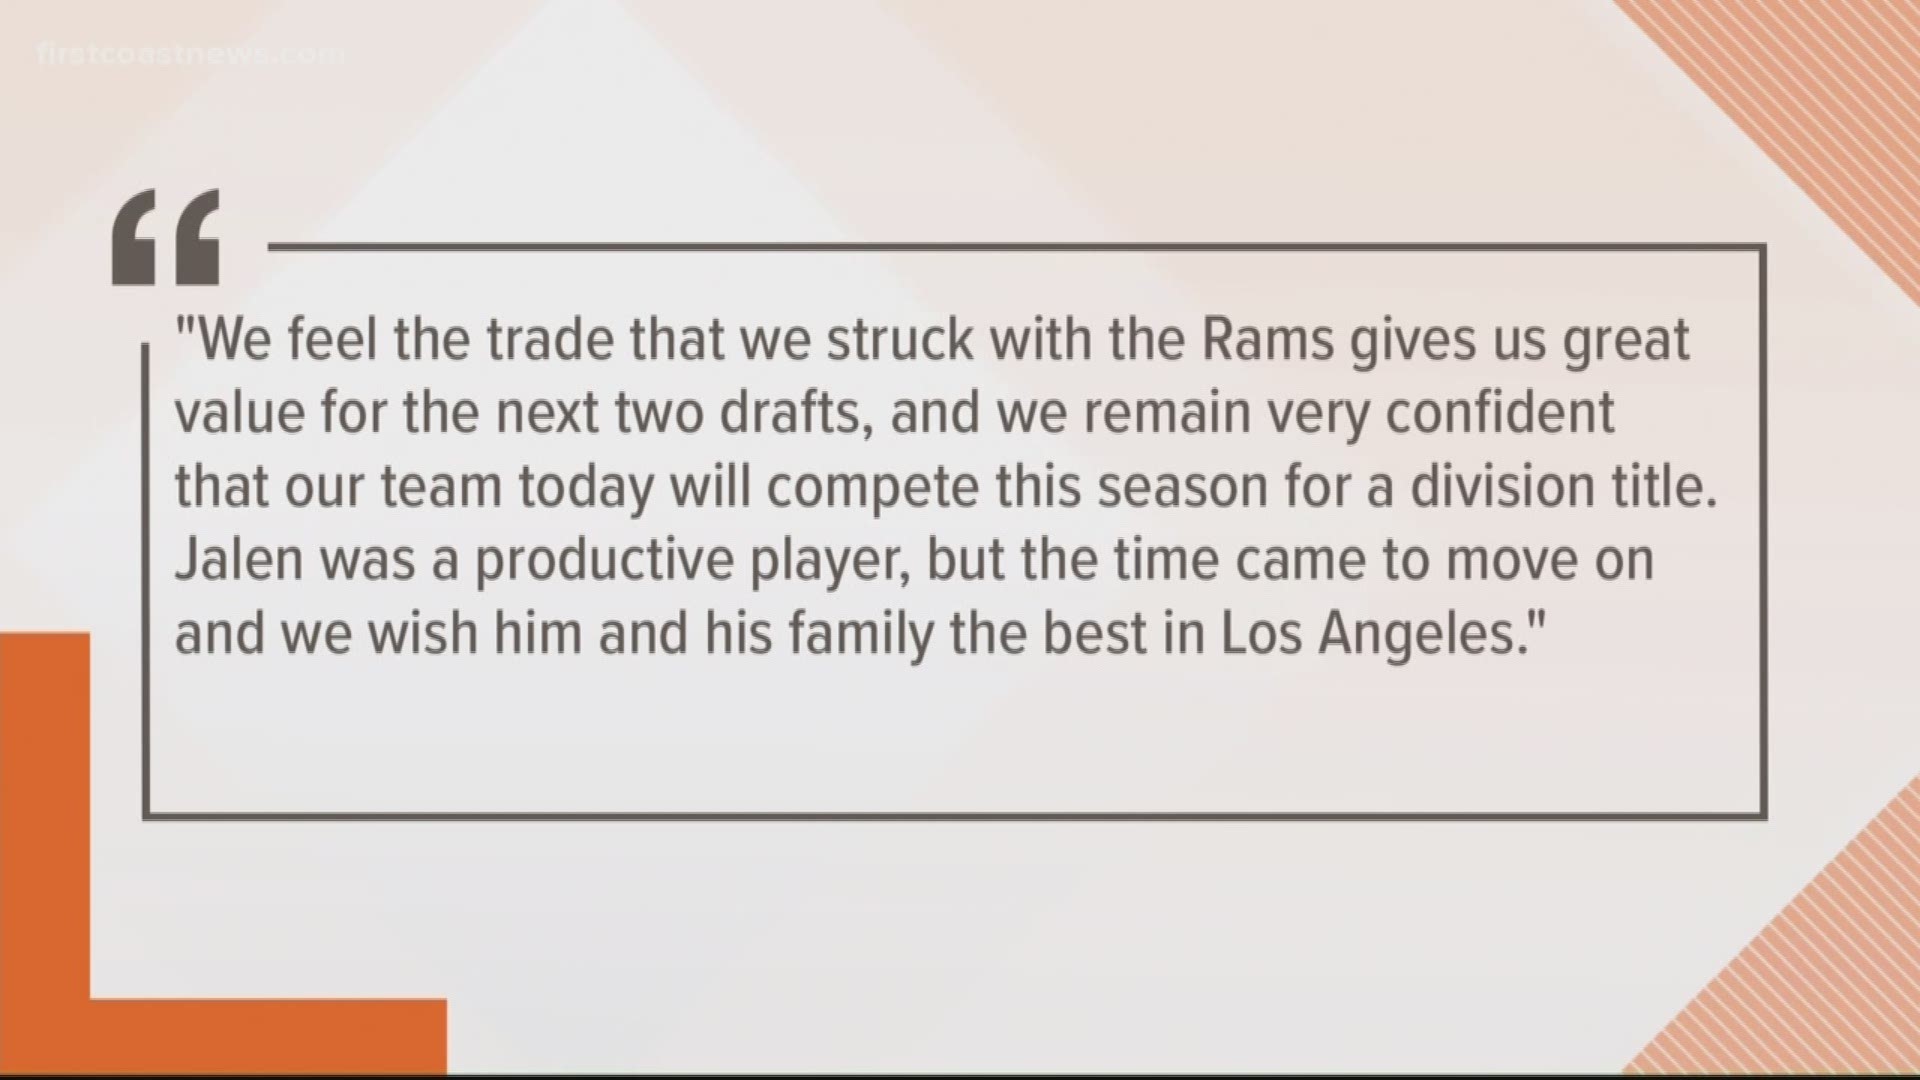 VP of Football Operations for the Jags issued a statement on Wednesday regarding Jalen Ramsey's trade to the Los Angeles Rams.